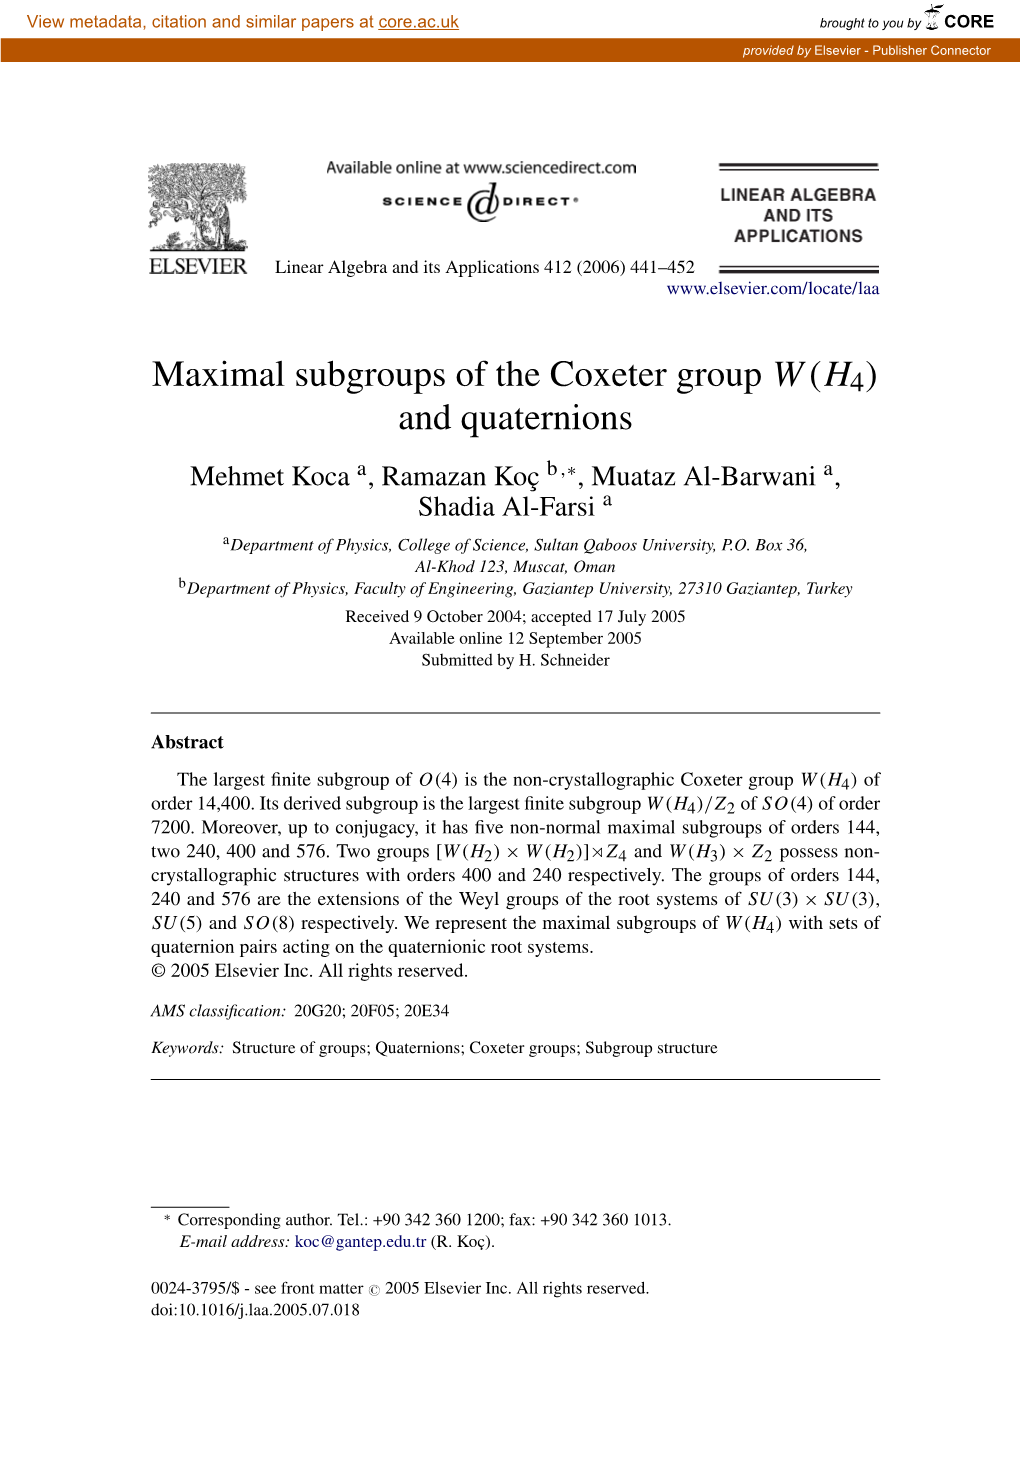 Maximal Subgroups of the Coxeter Group W(H4) and Quaternions